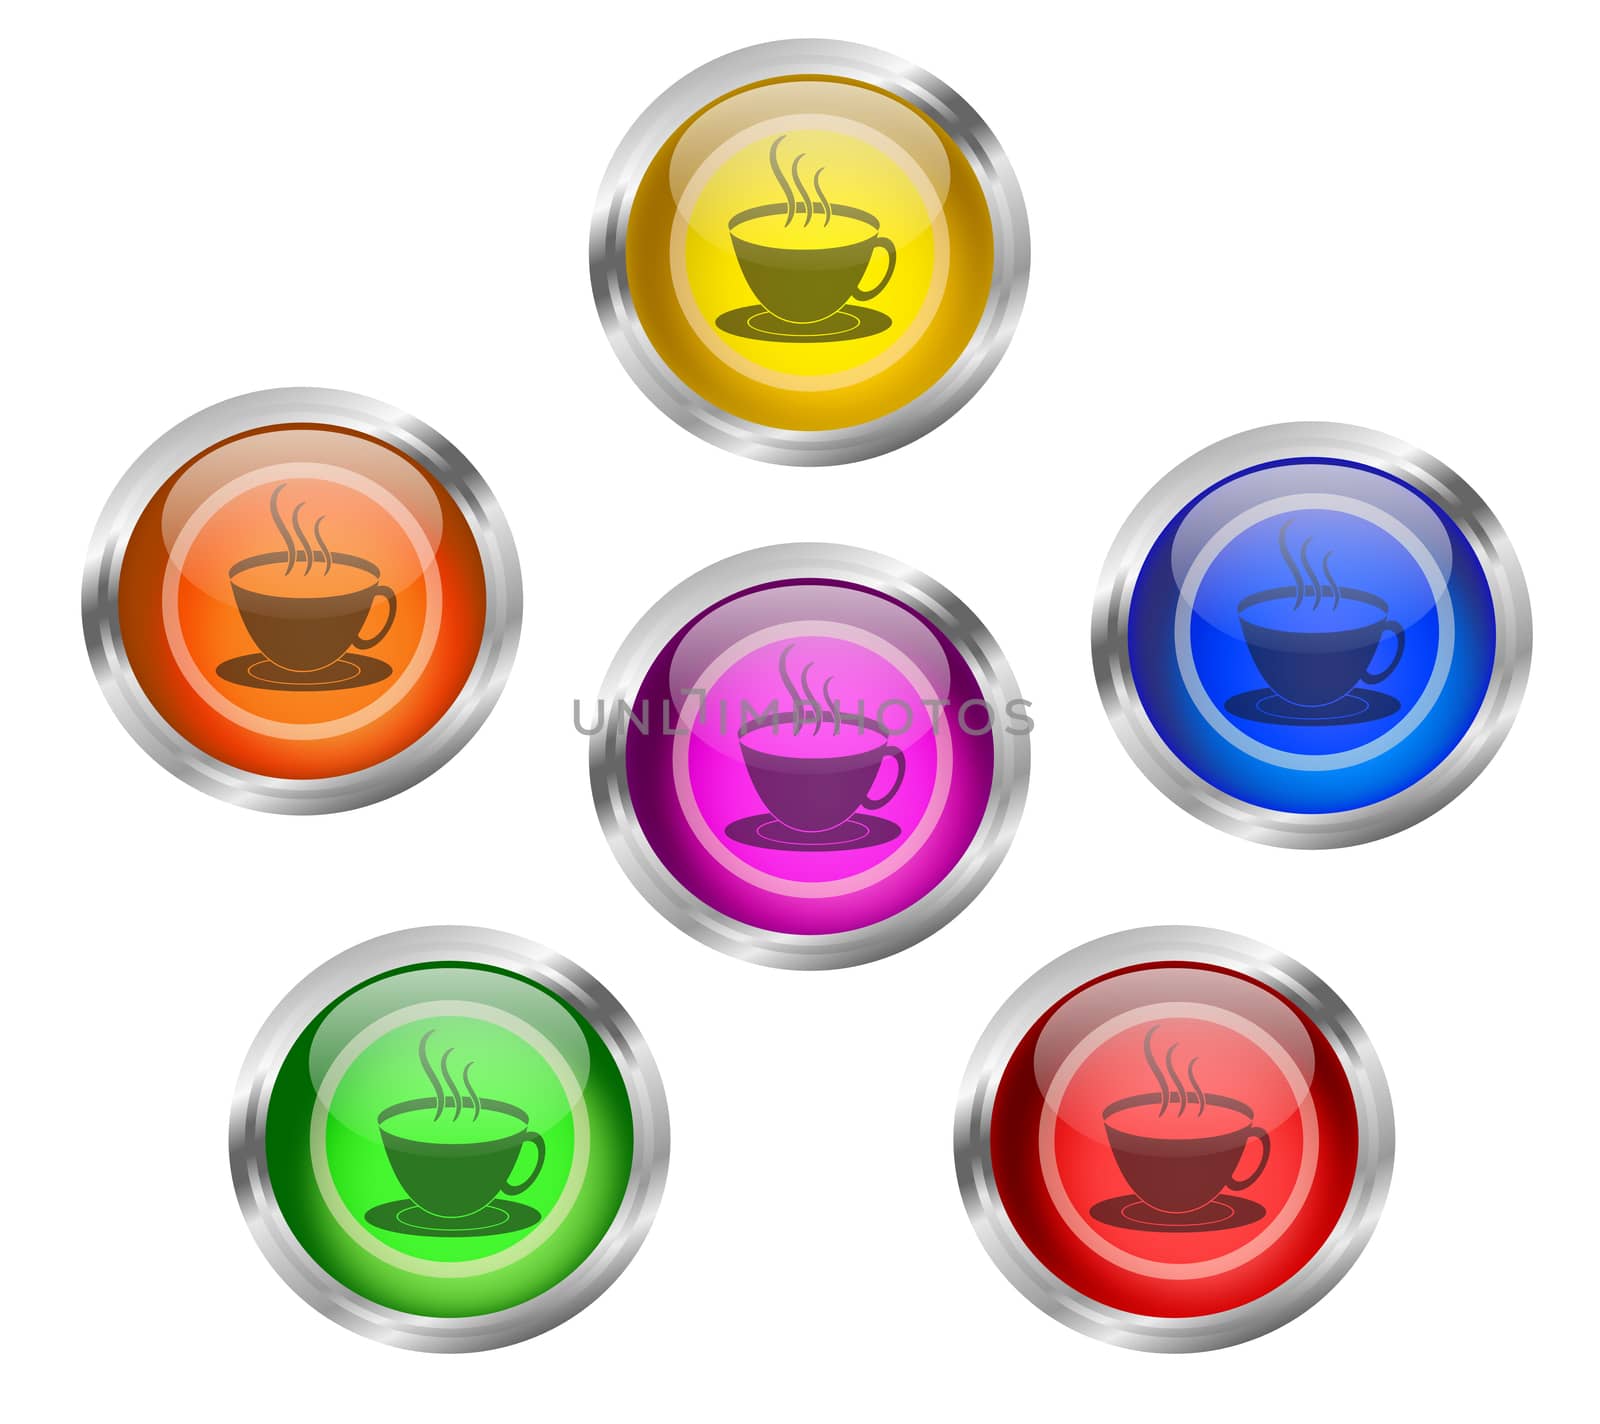 Tea Coffee Cup Icon Button by RichieThakur